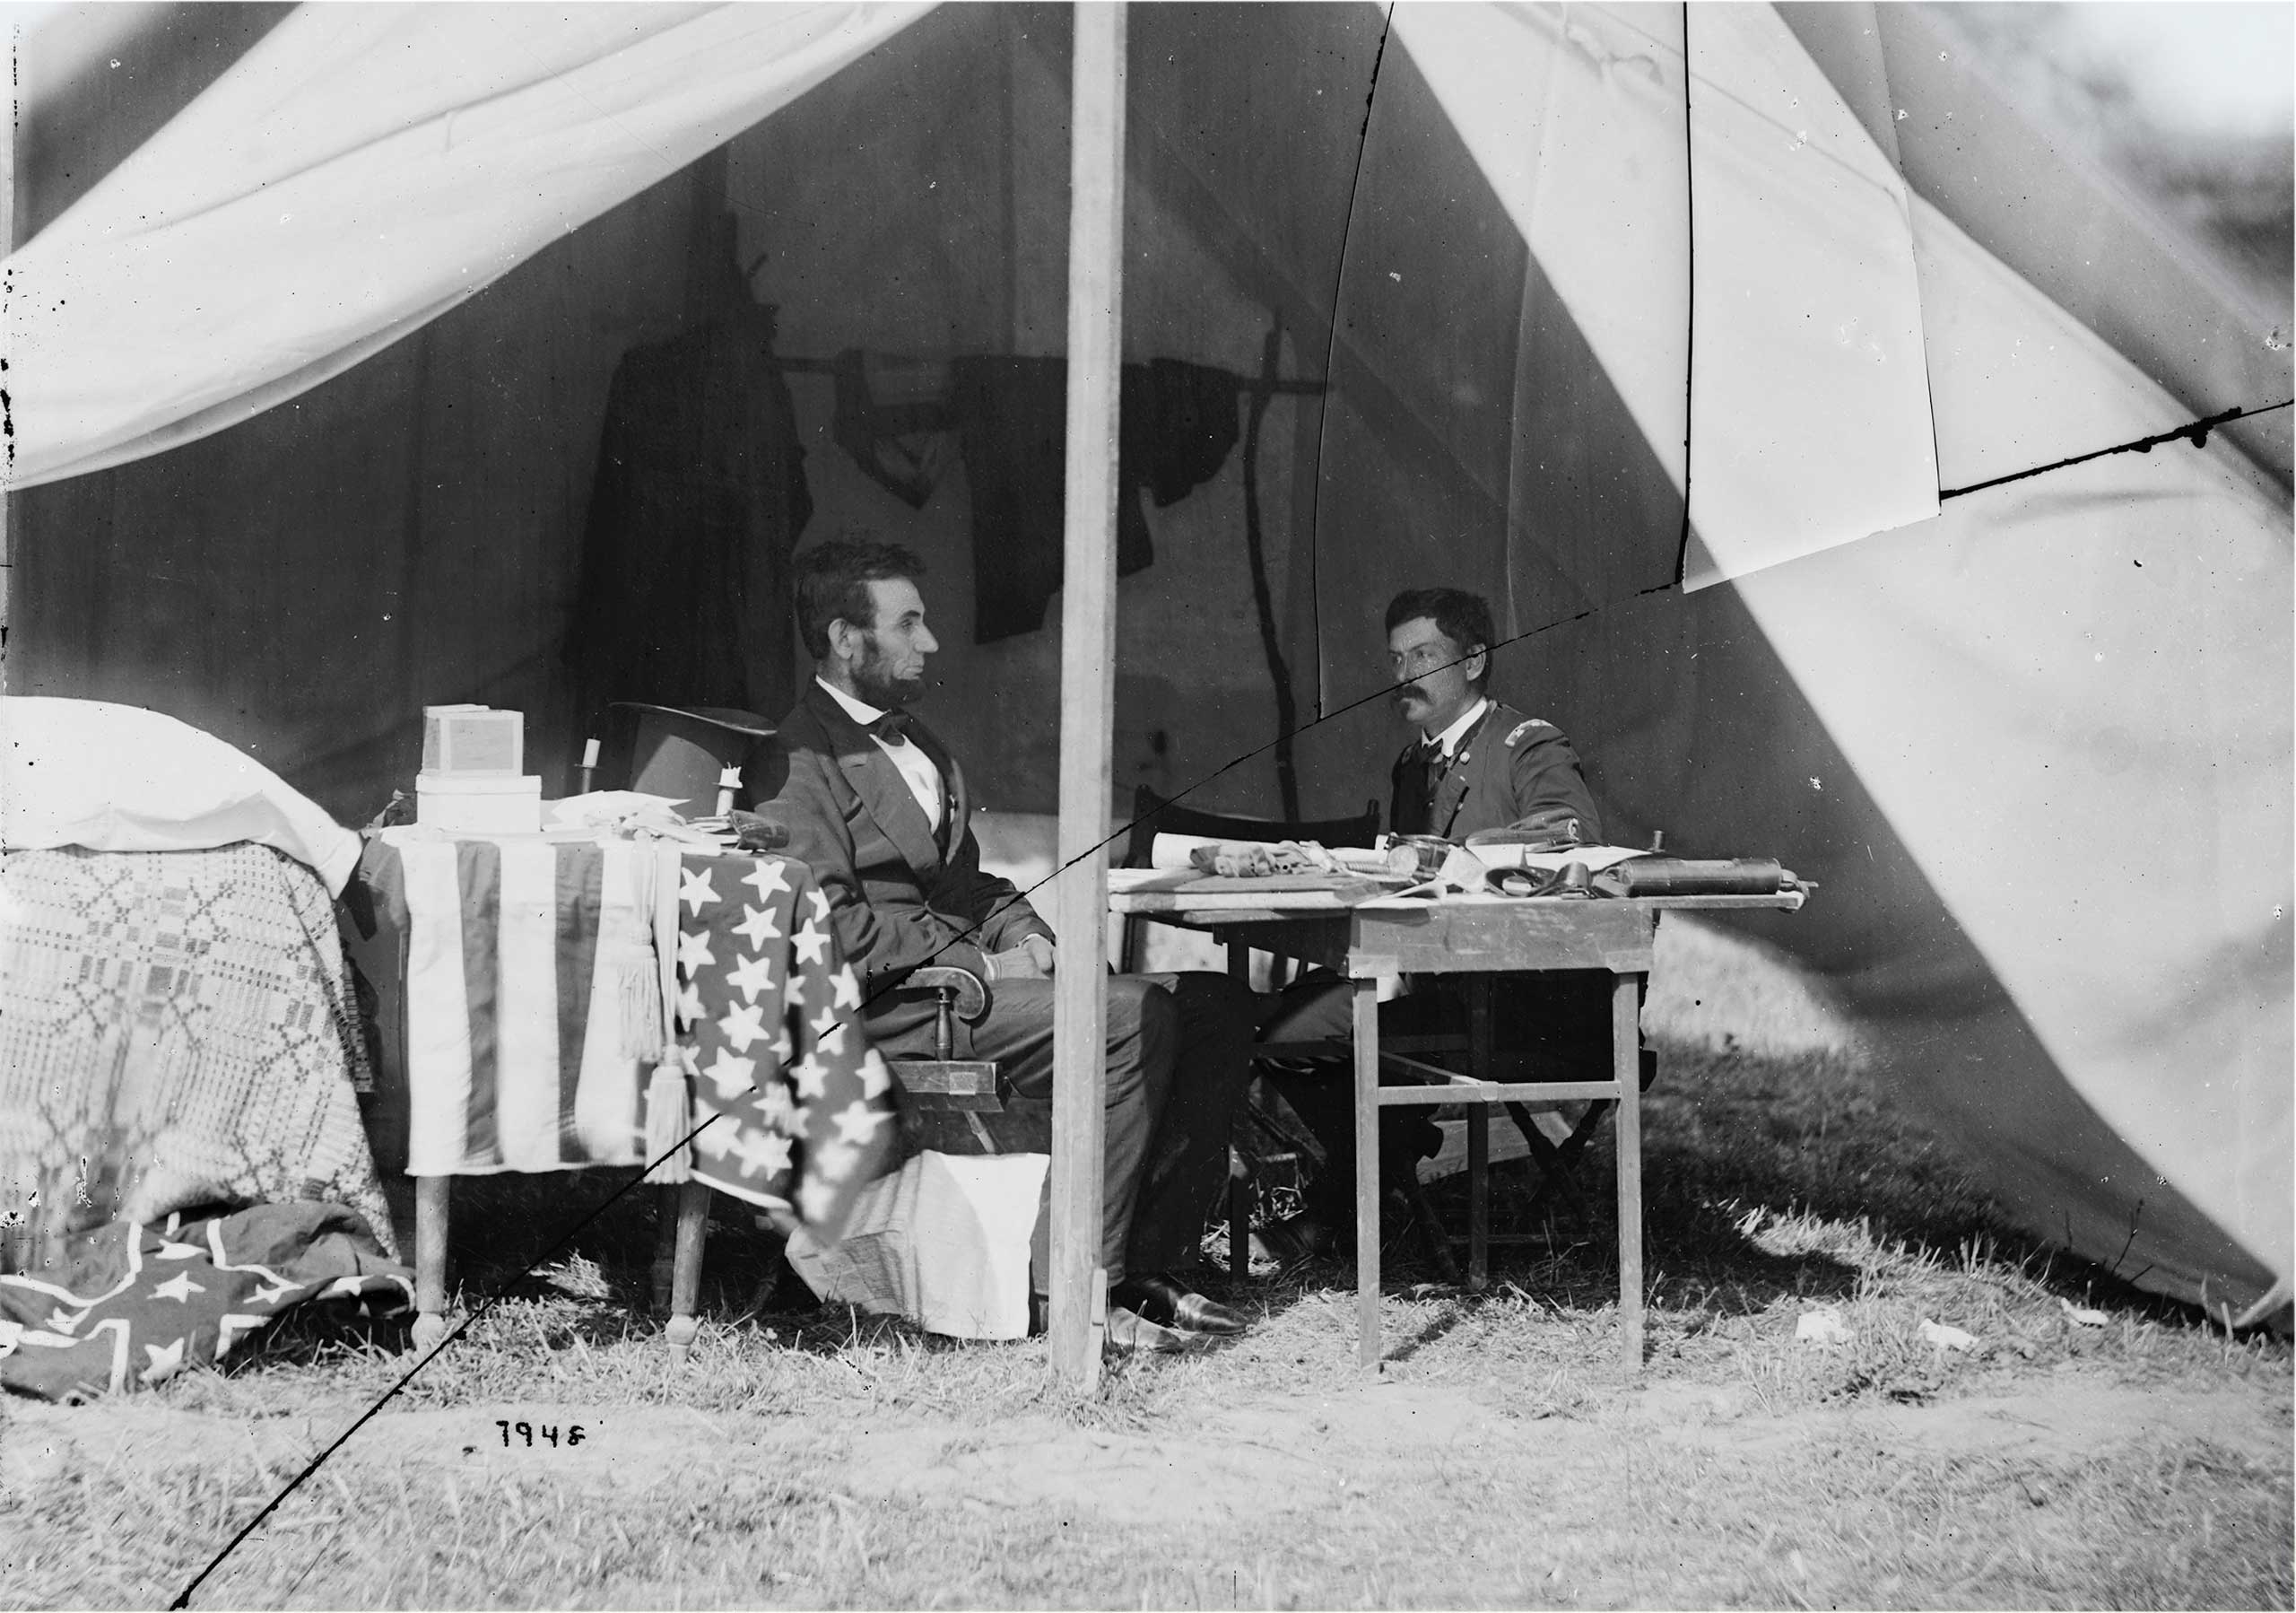 President Lincoln and Gen. George B. McClellan in the general's tent, Antietam, Md., Sept. - Oct. 1862.